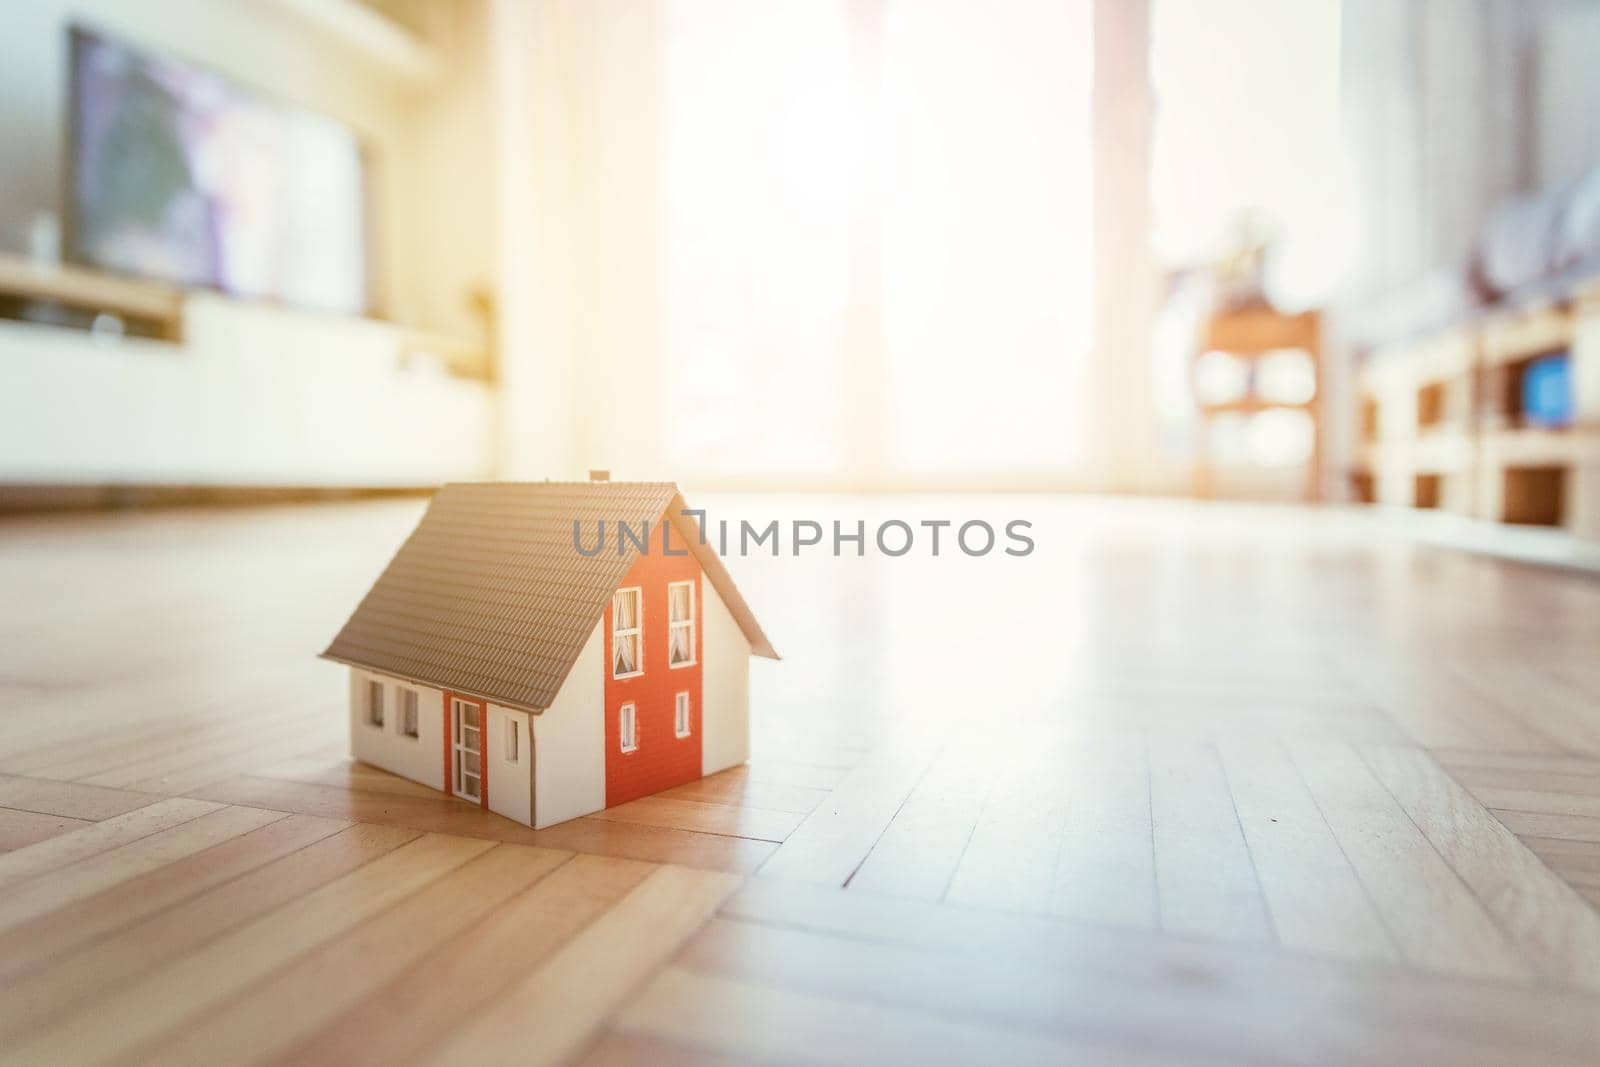 Red house model on the floor, indoors. Concept for new home, property and estate